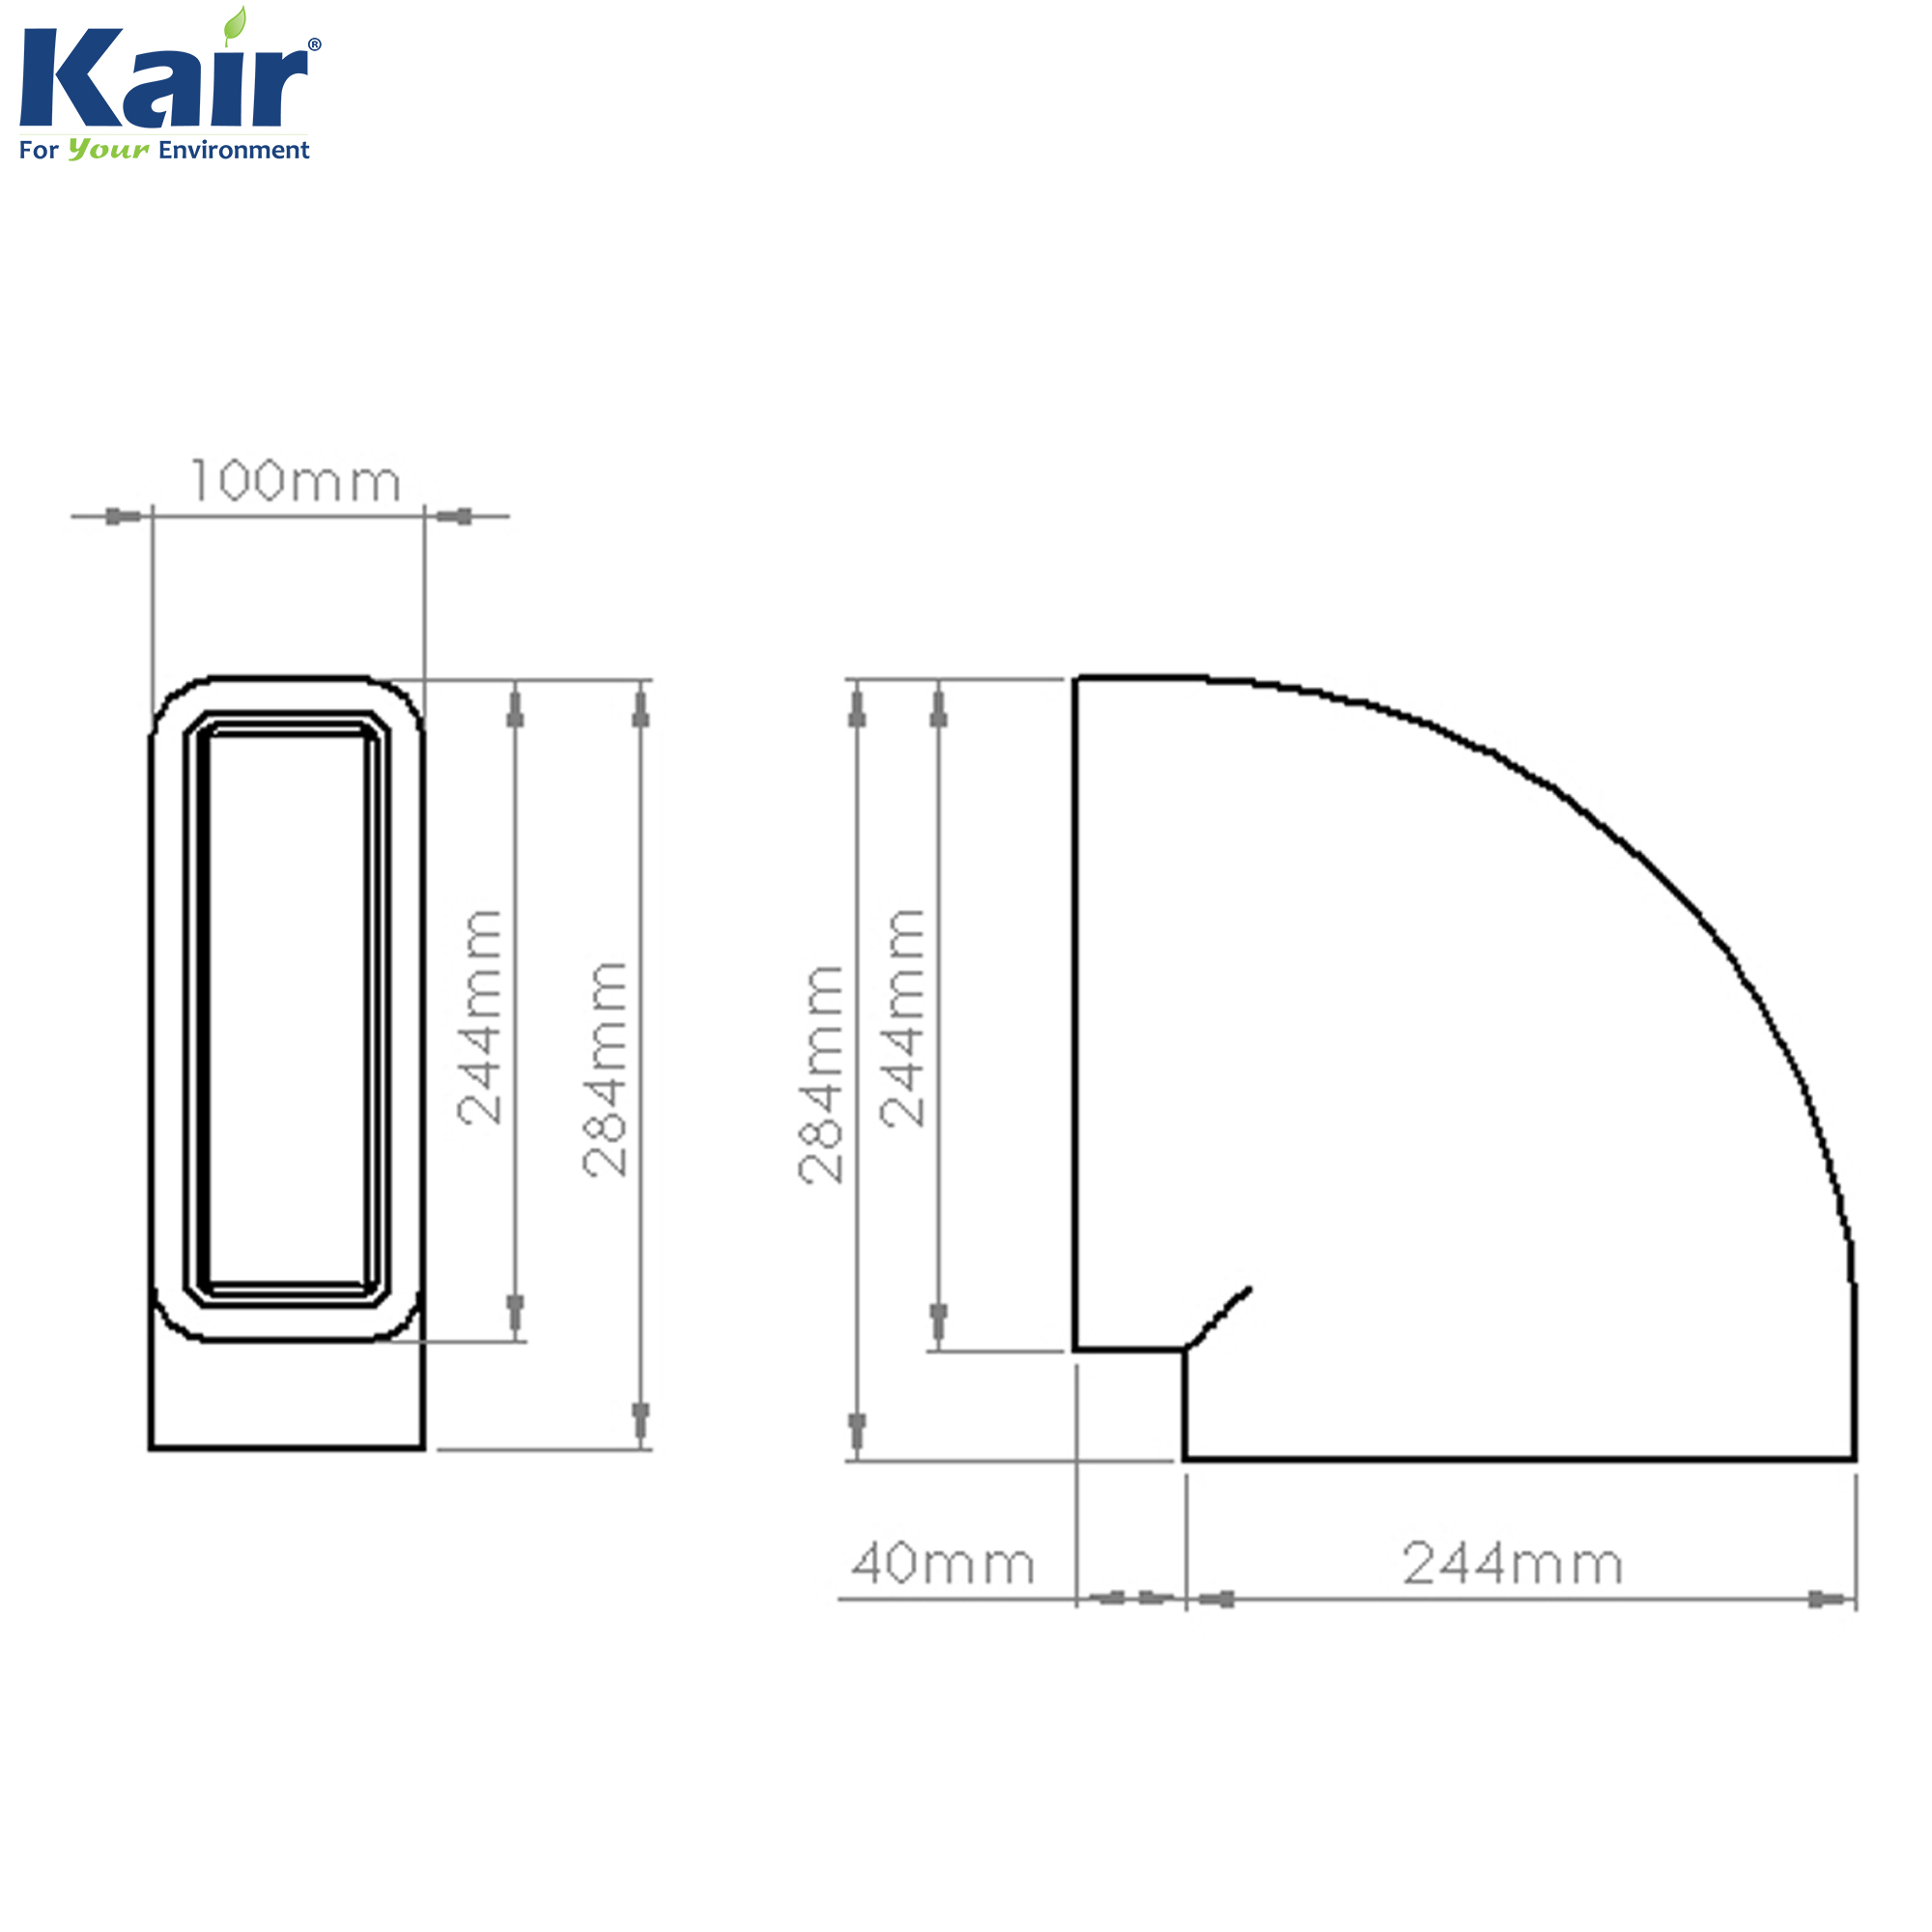 Box of 6 x Kair Self-Seal Thermal Ducting 204X60mm Horizontal 90 Degree Bend Complete With Female Click And Lock Fittings